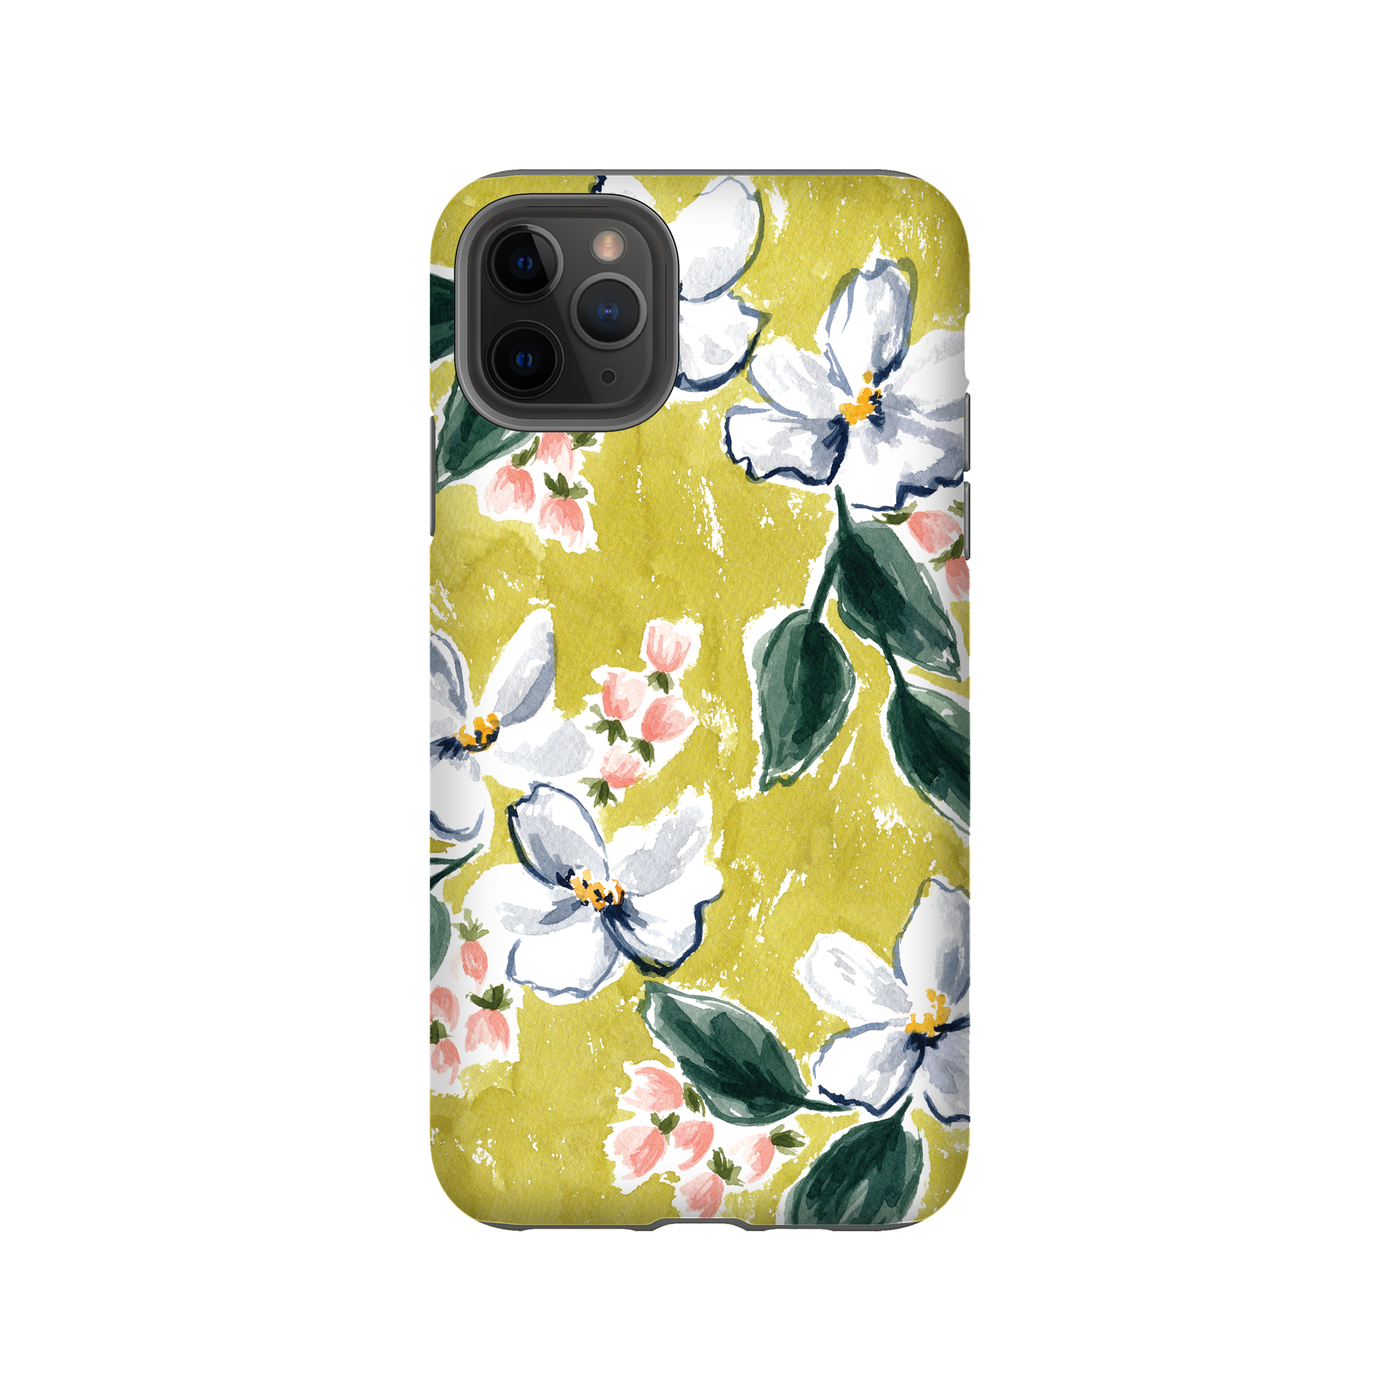 MYSTERY PHONE CASE iPhone XS Max